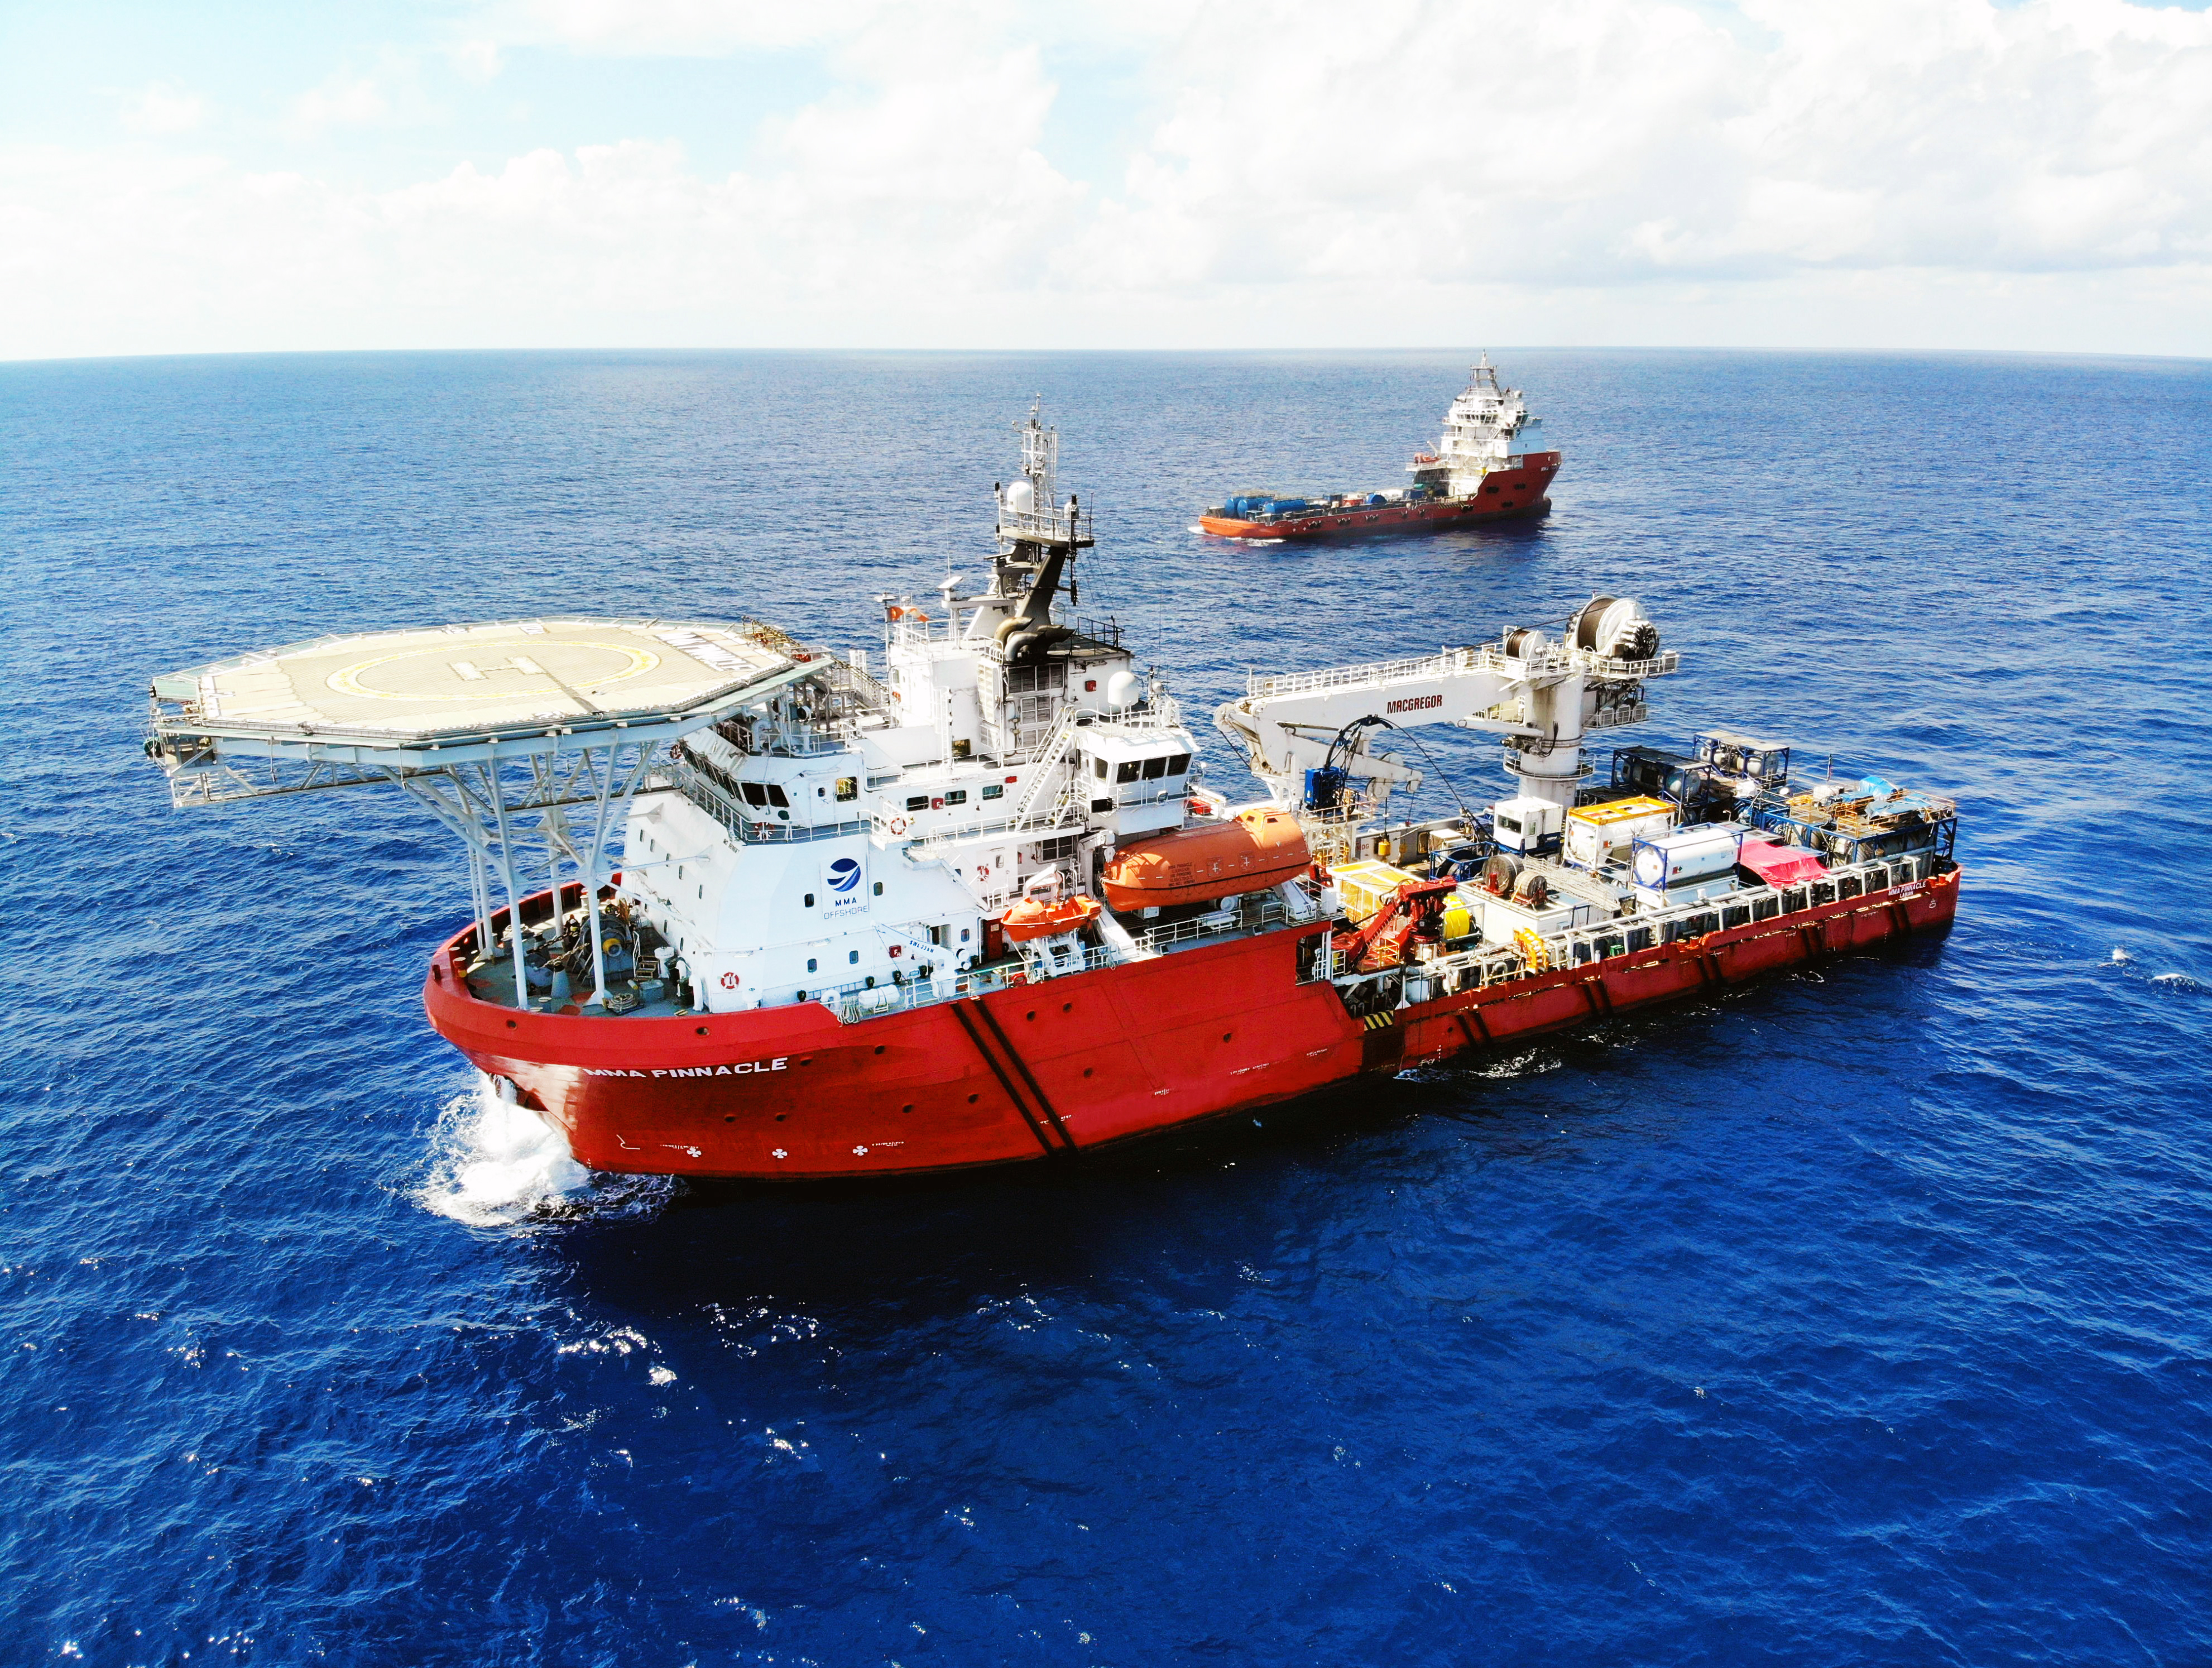 /sites/mmaoffshorecomau//assets/public/image/ProductListing/Pinnacle Subsea Well Intervention.jpg